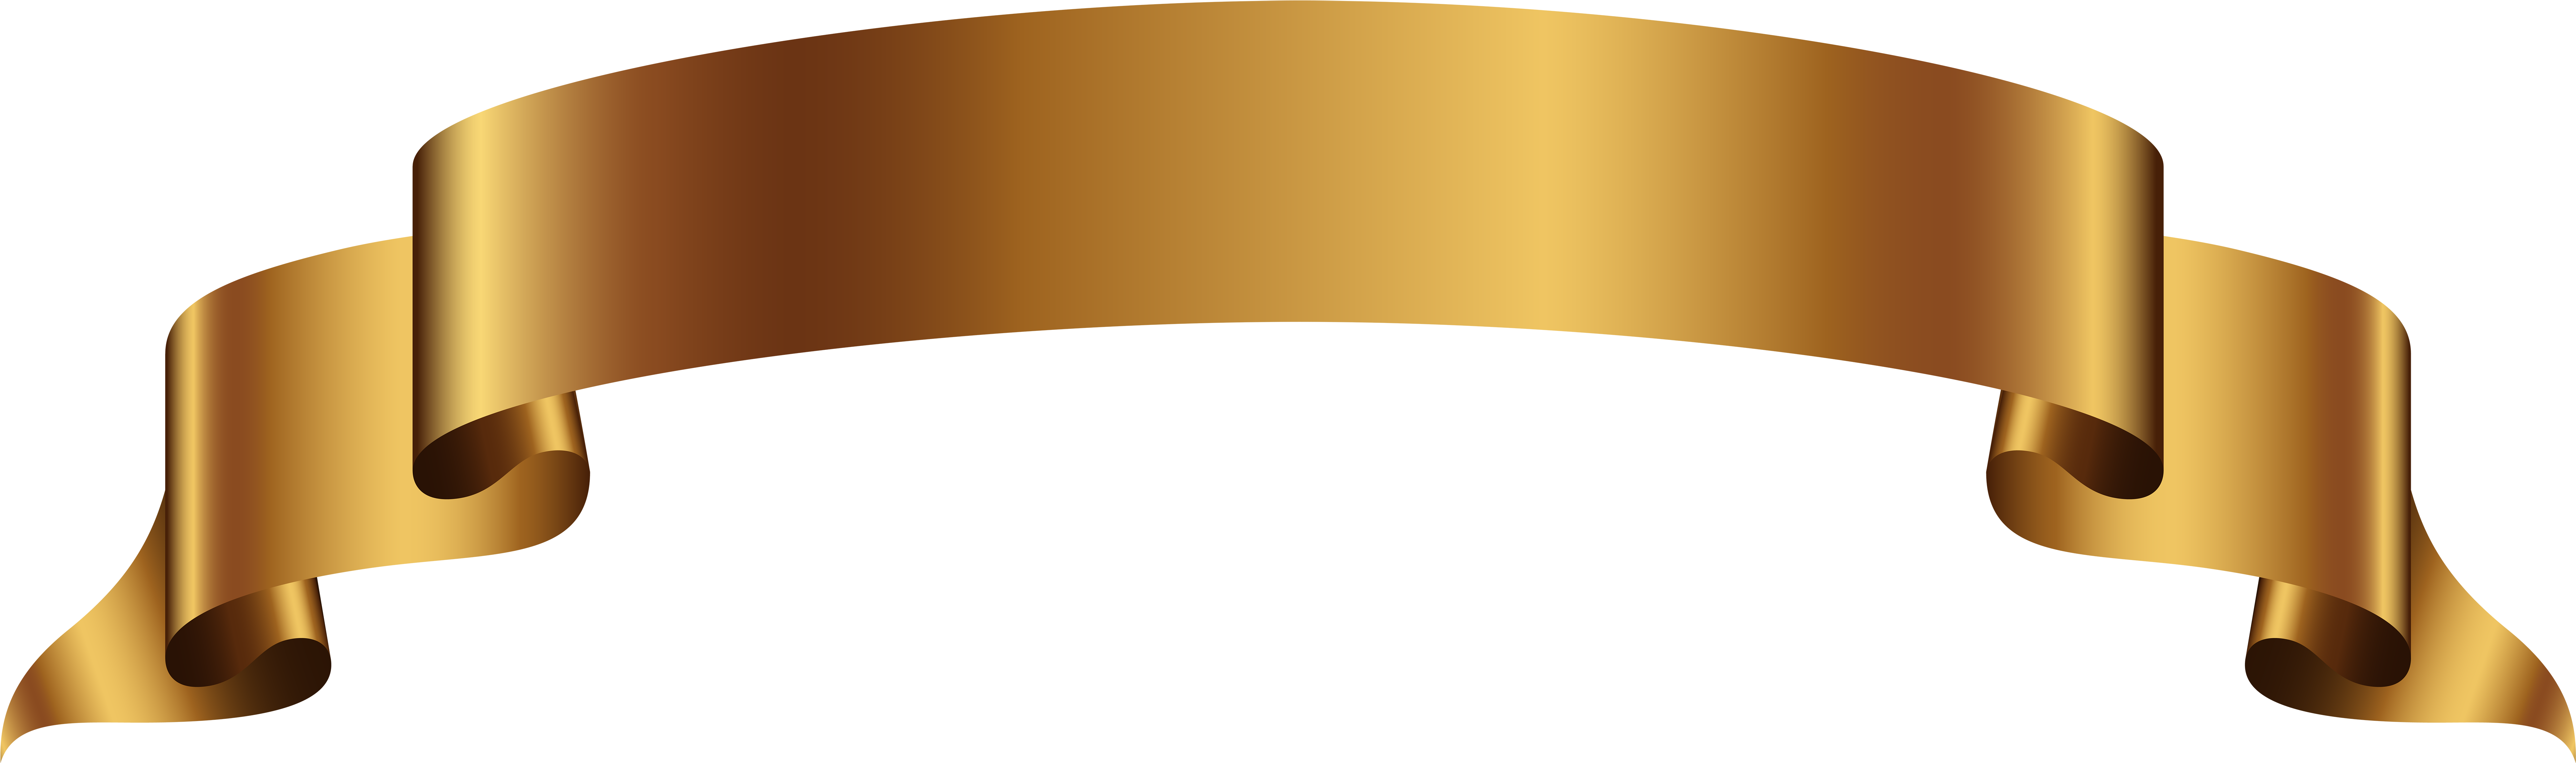 Gold Banner Png 7859 X 2327